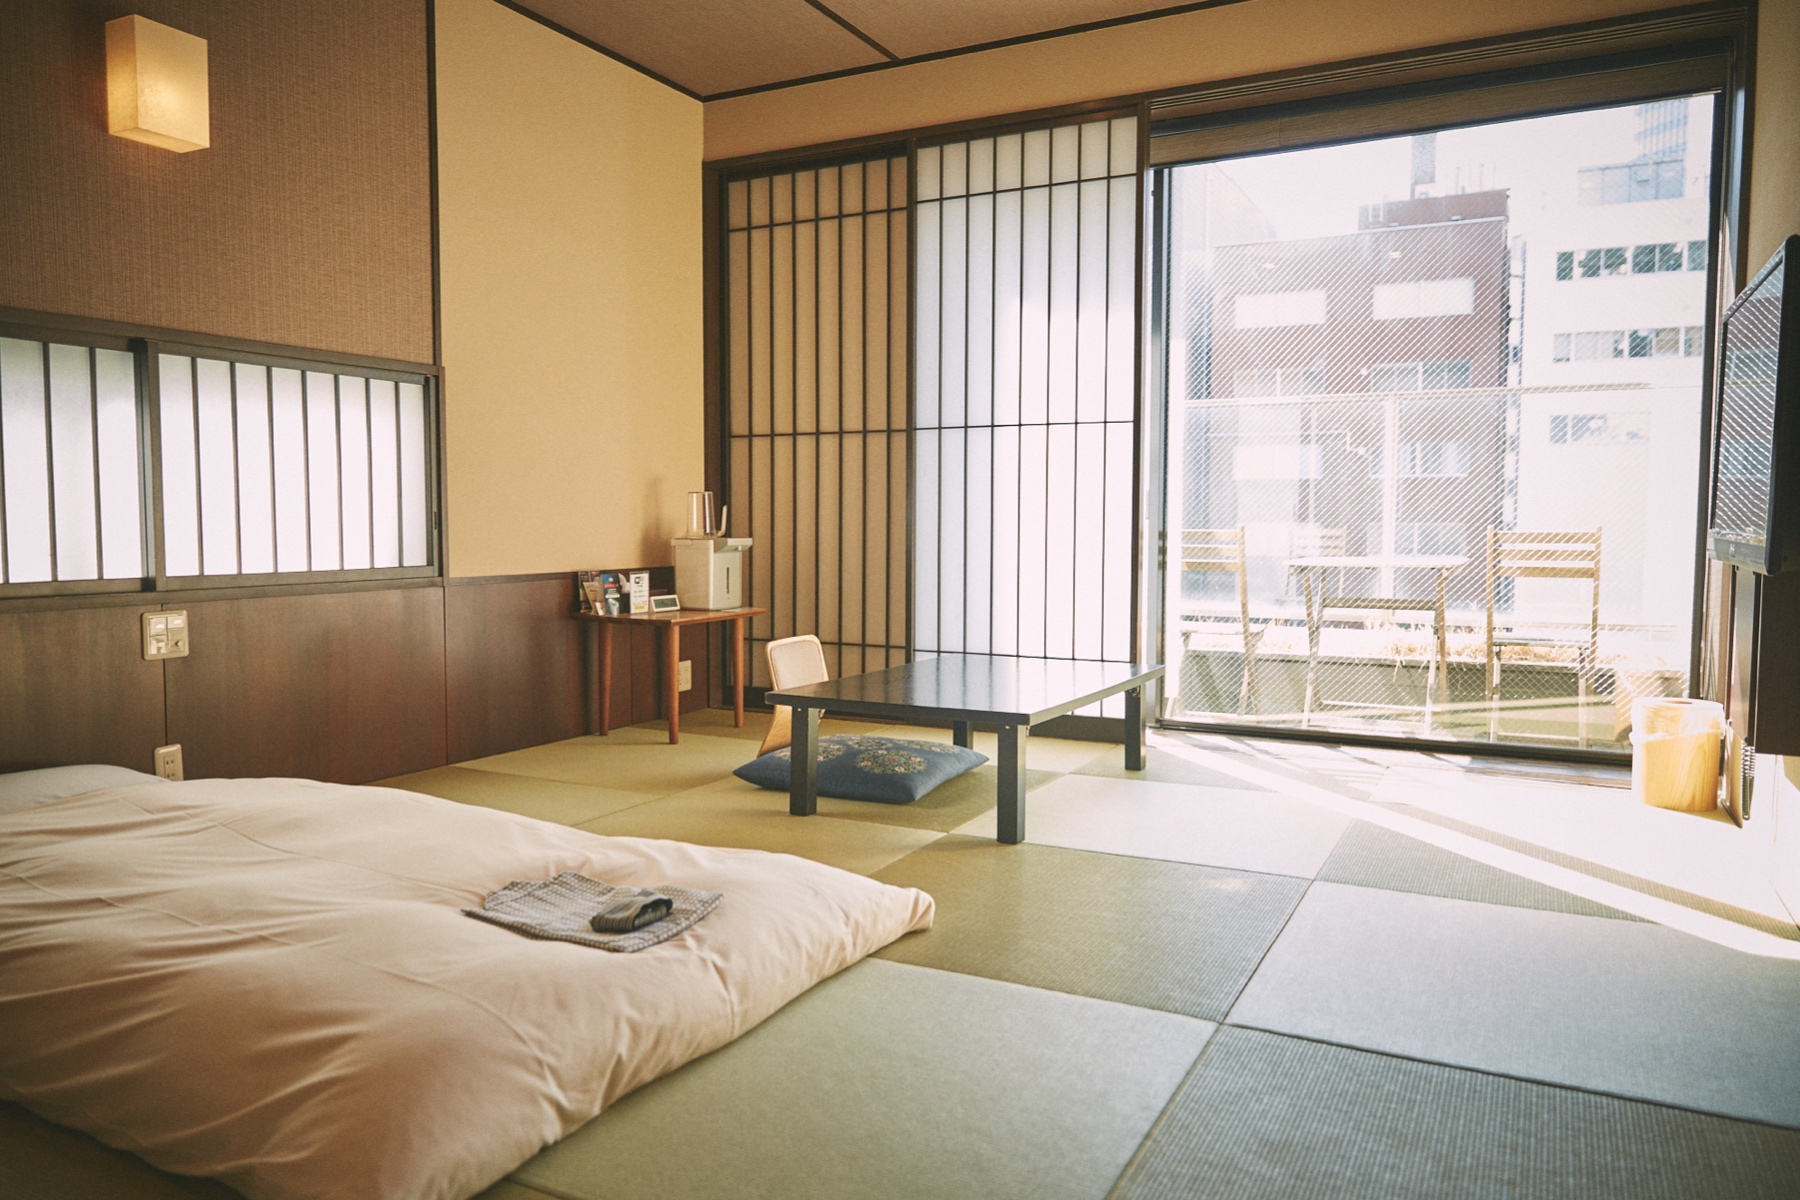 A Modern and Traditional Japanese design in a room at Shoryukan